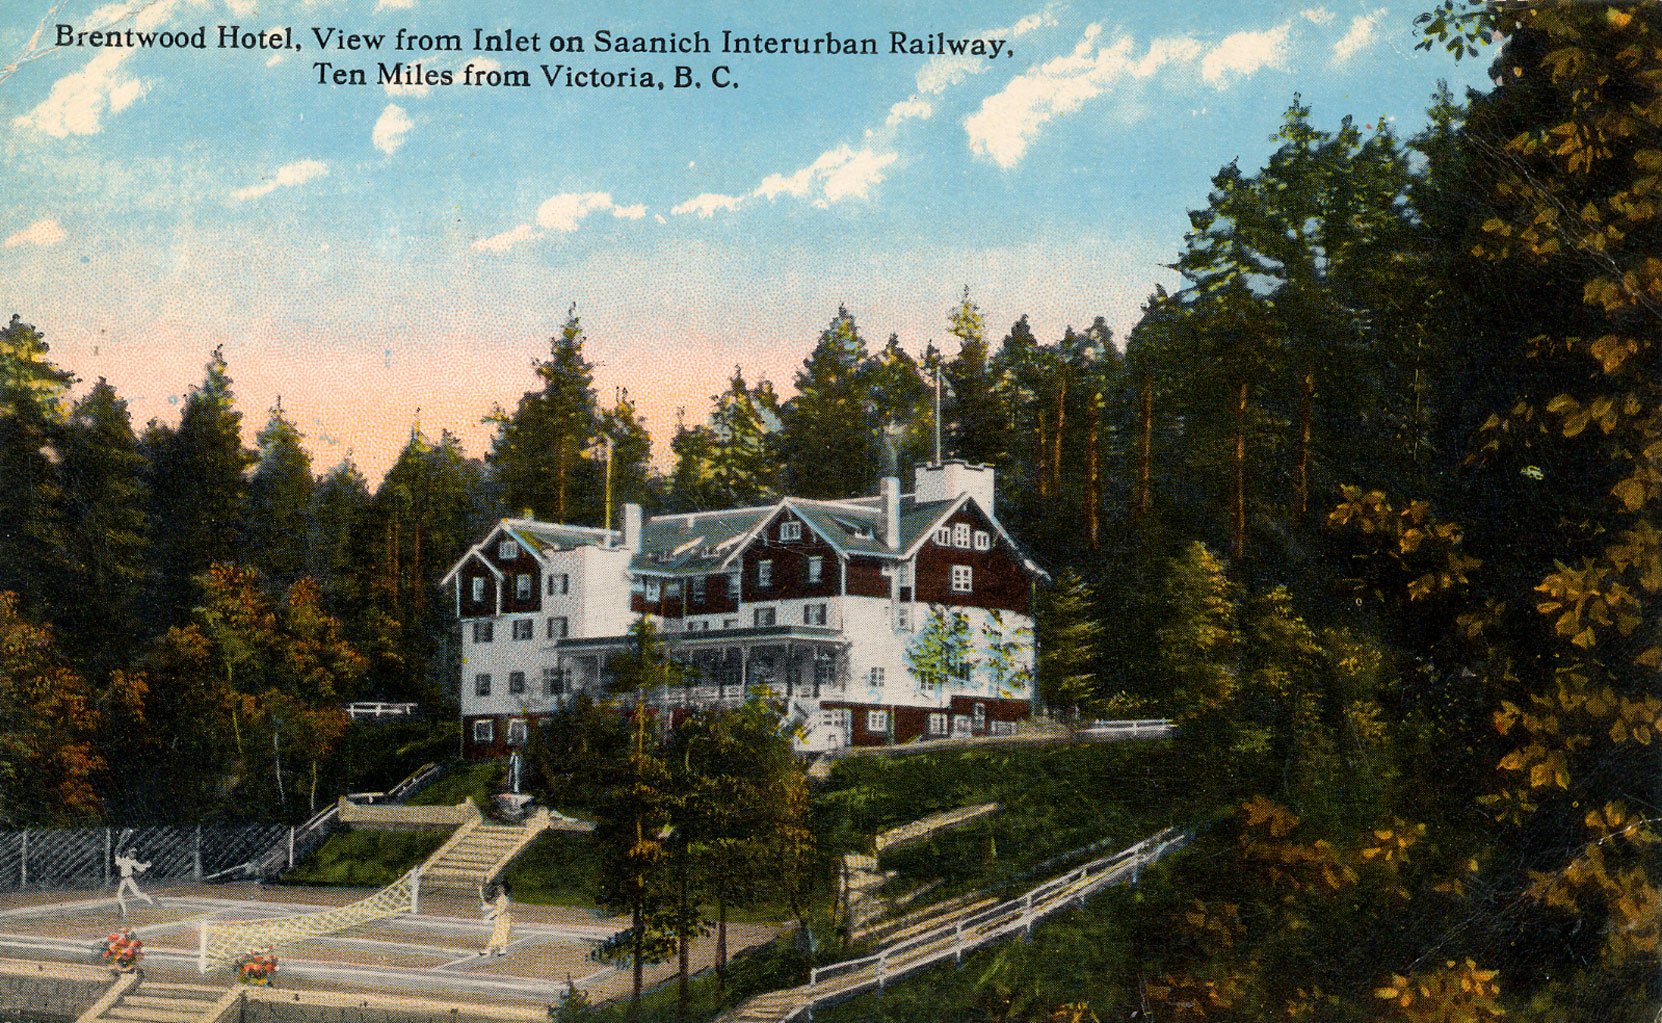 Postcard showing the Brentwood Hotel, circa 1920 (Author's collection)